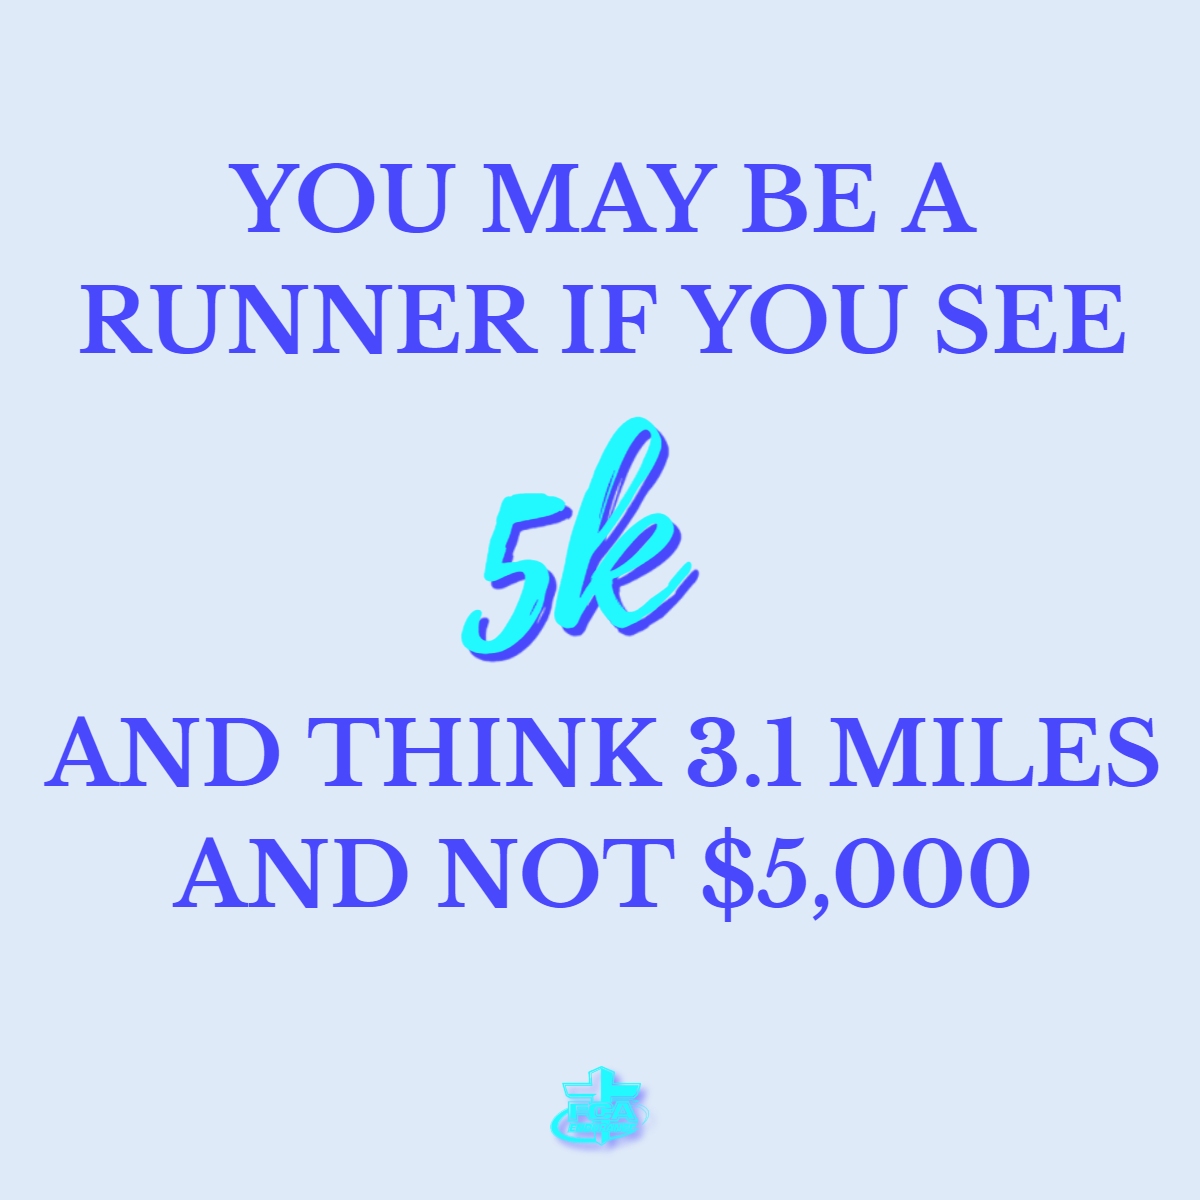 You may be a runner if...